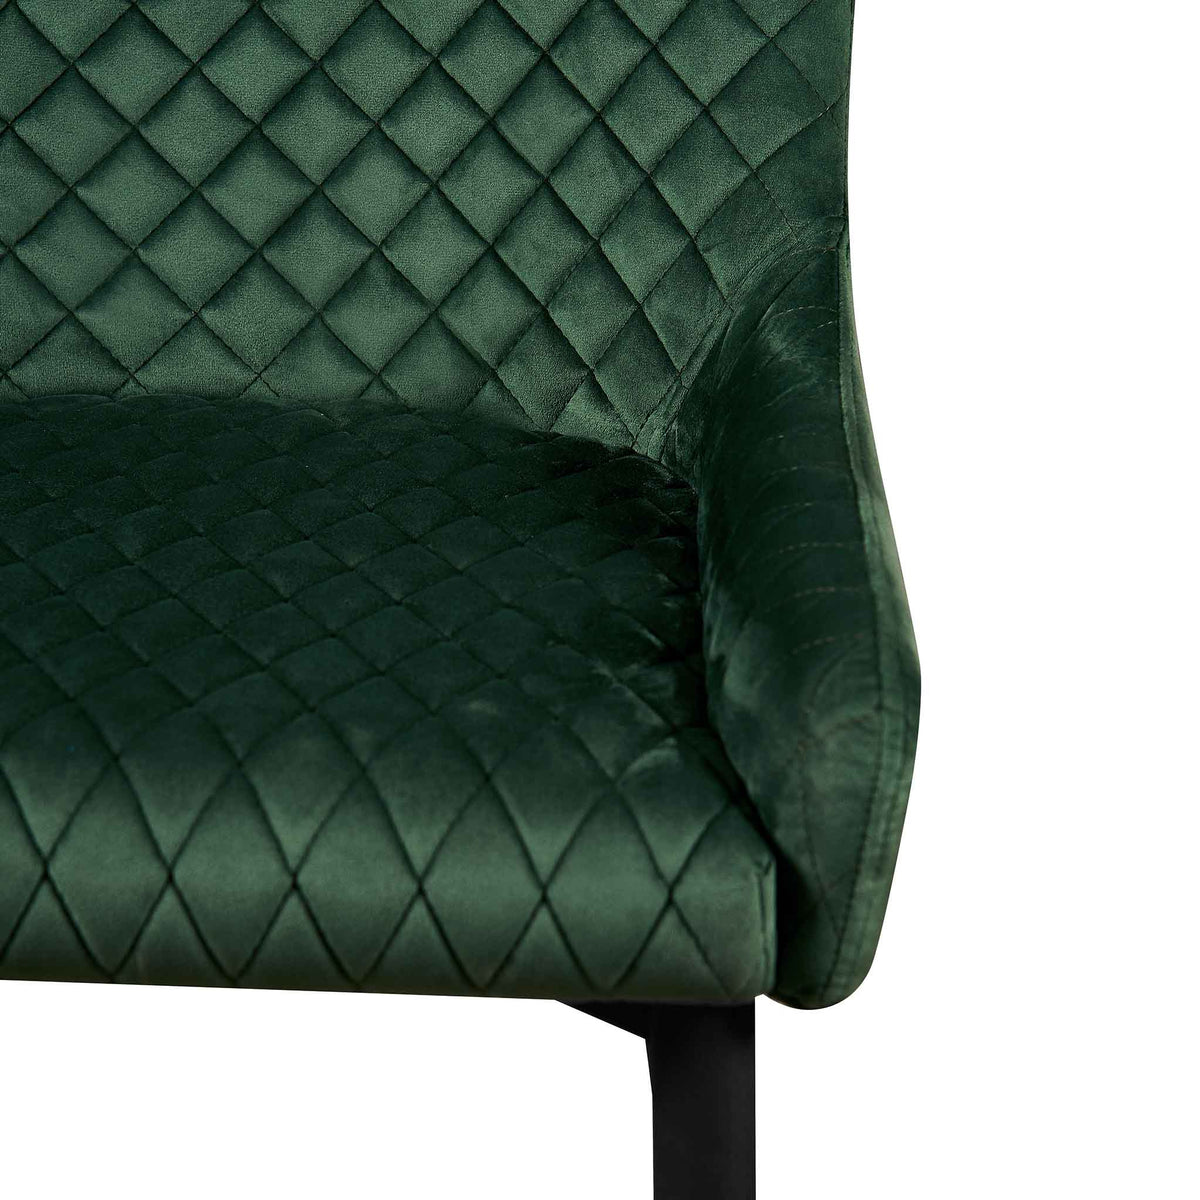 Brooklyn Forest Olive Green Velvet Dining Chair